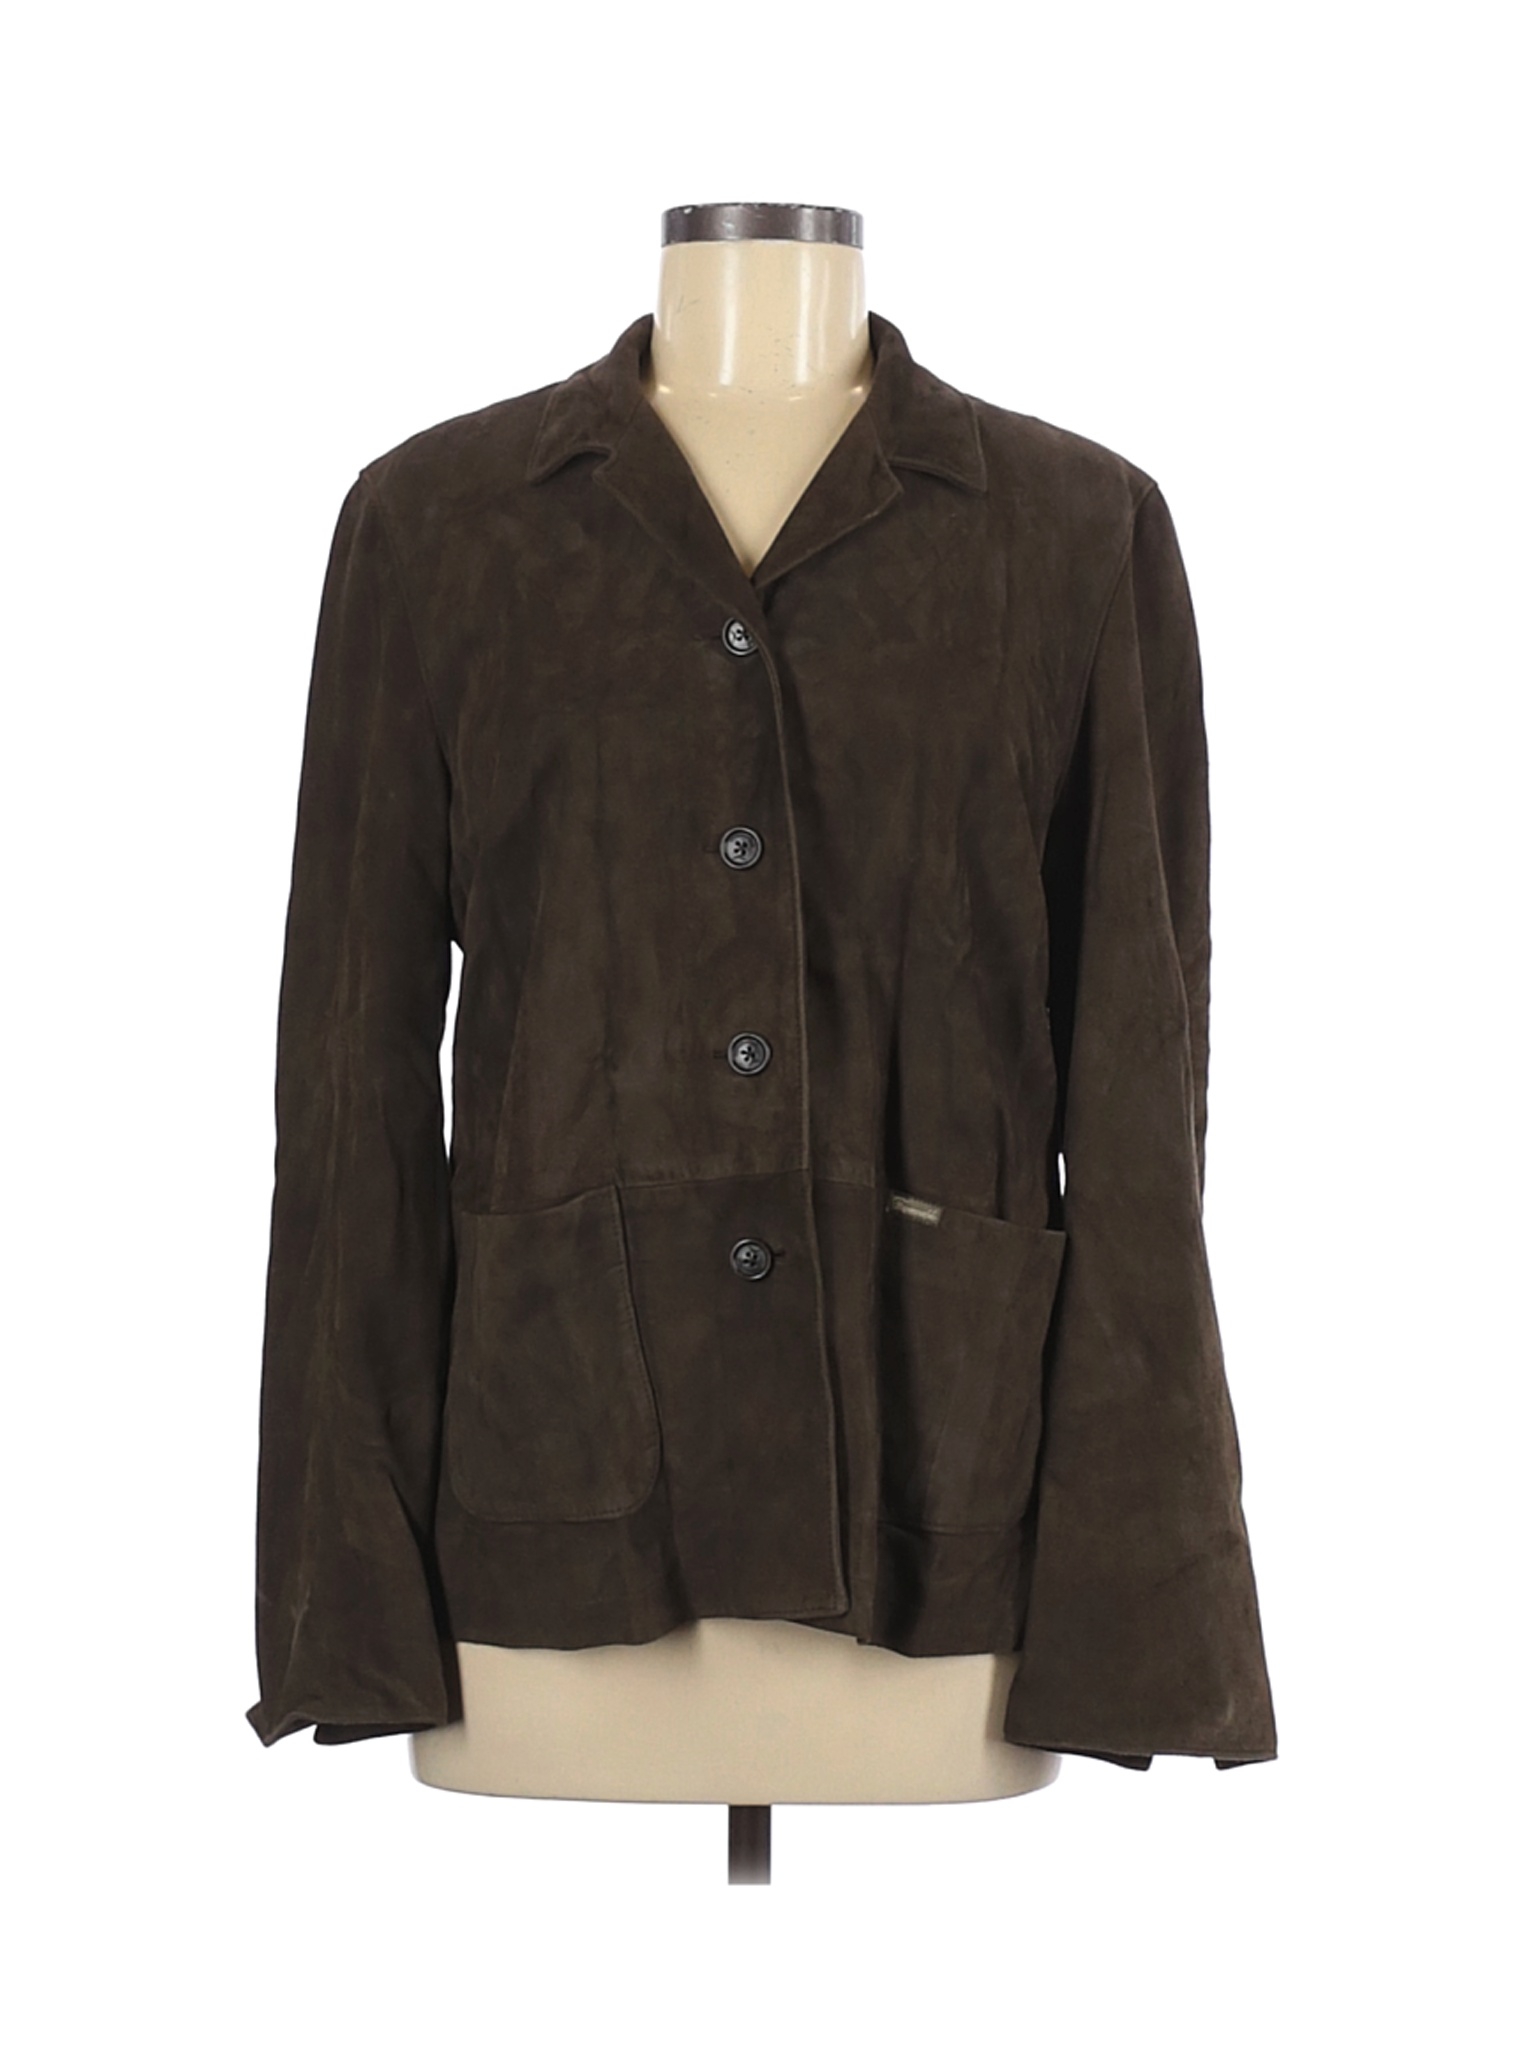 Faconnable Women Brown Leather Jacket M | eBay